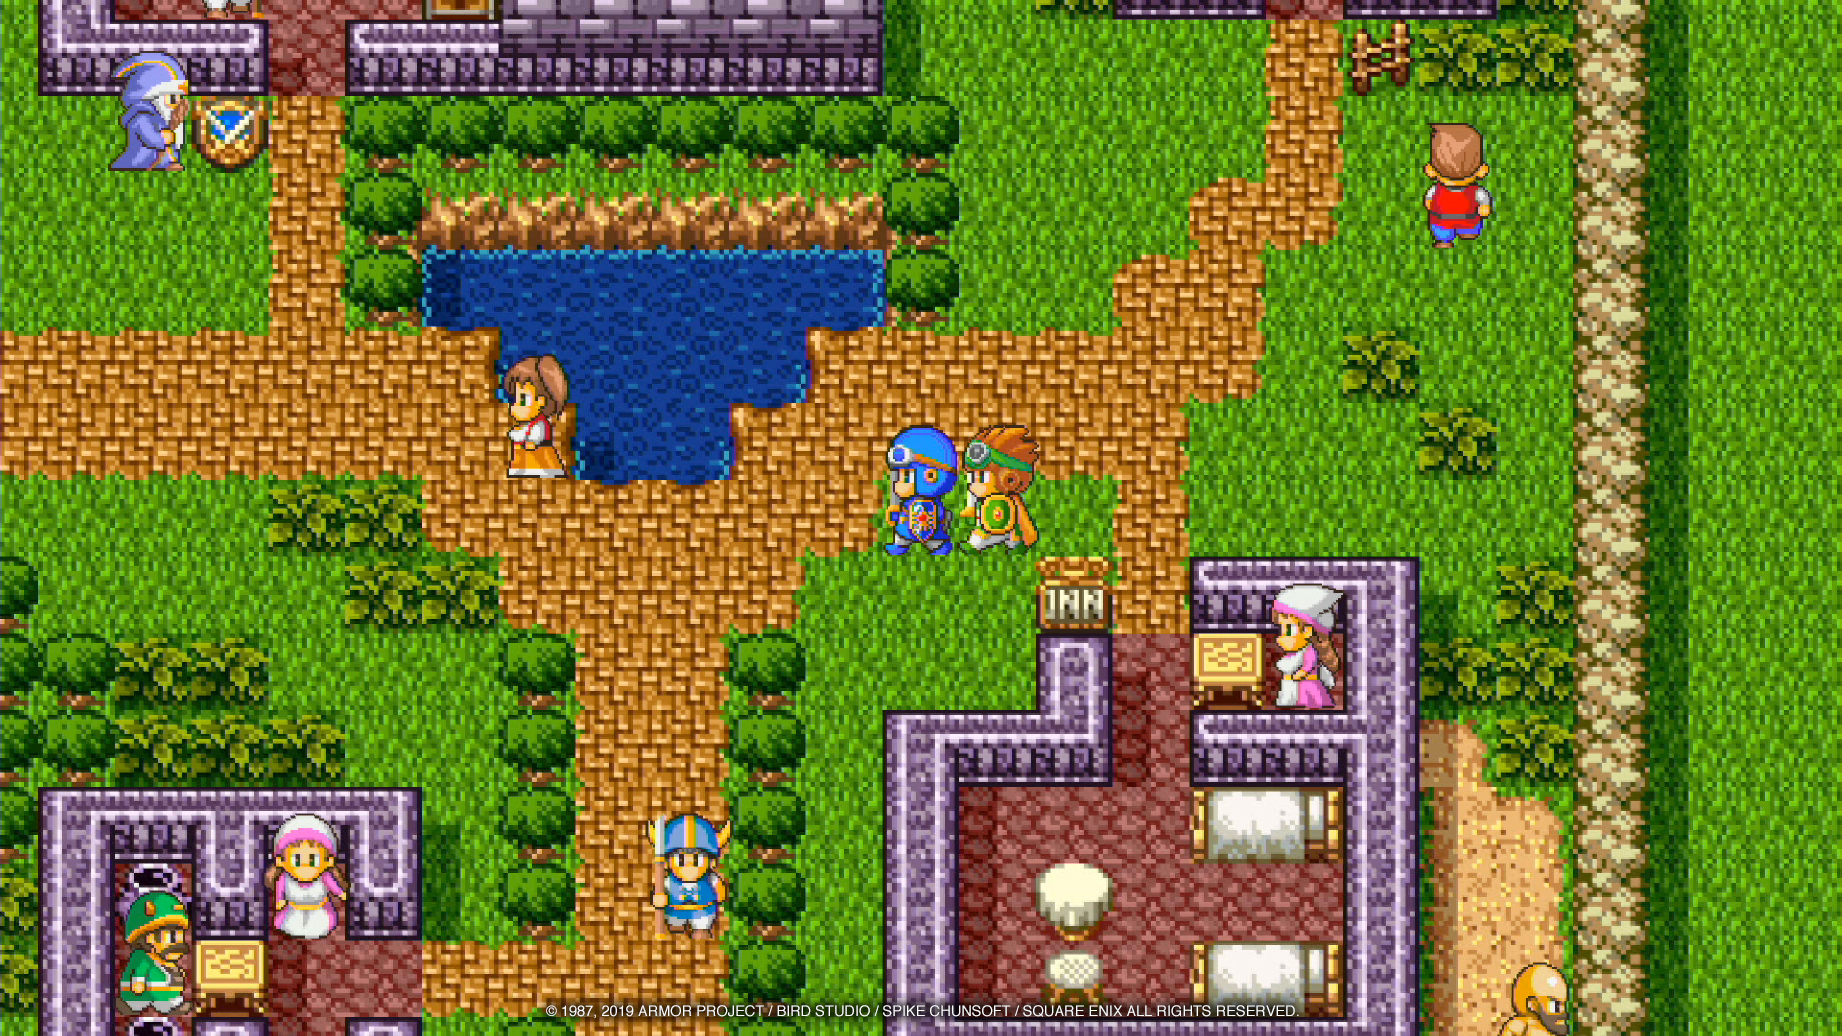 Square Enix's Dragon Quest III launches worldwide